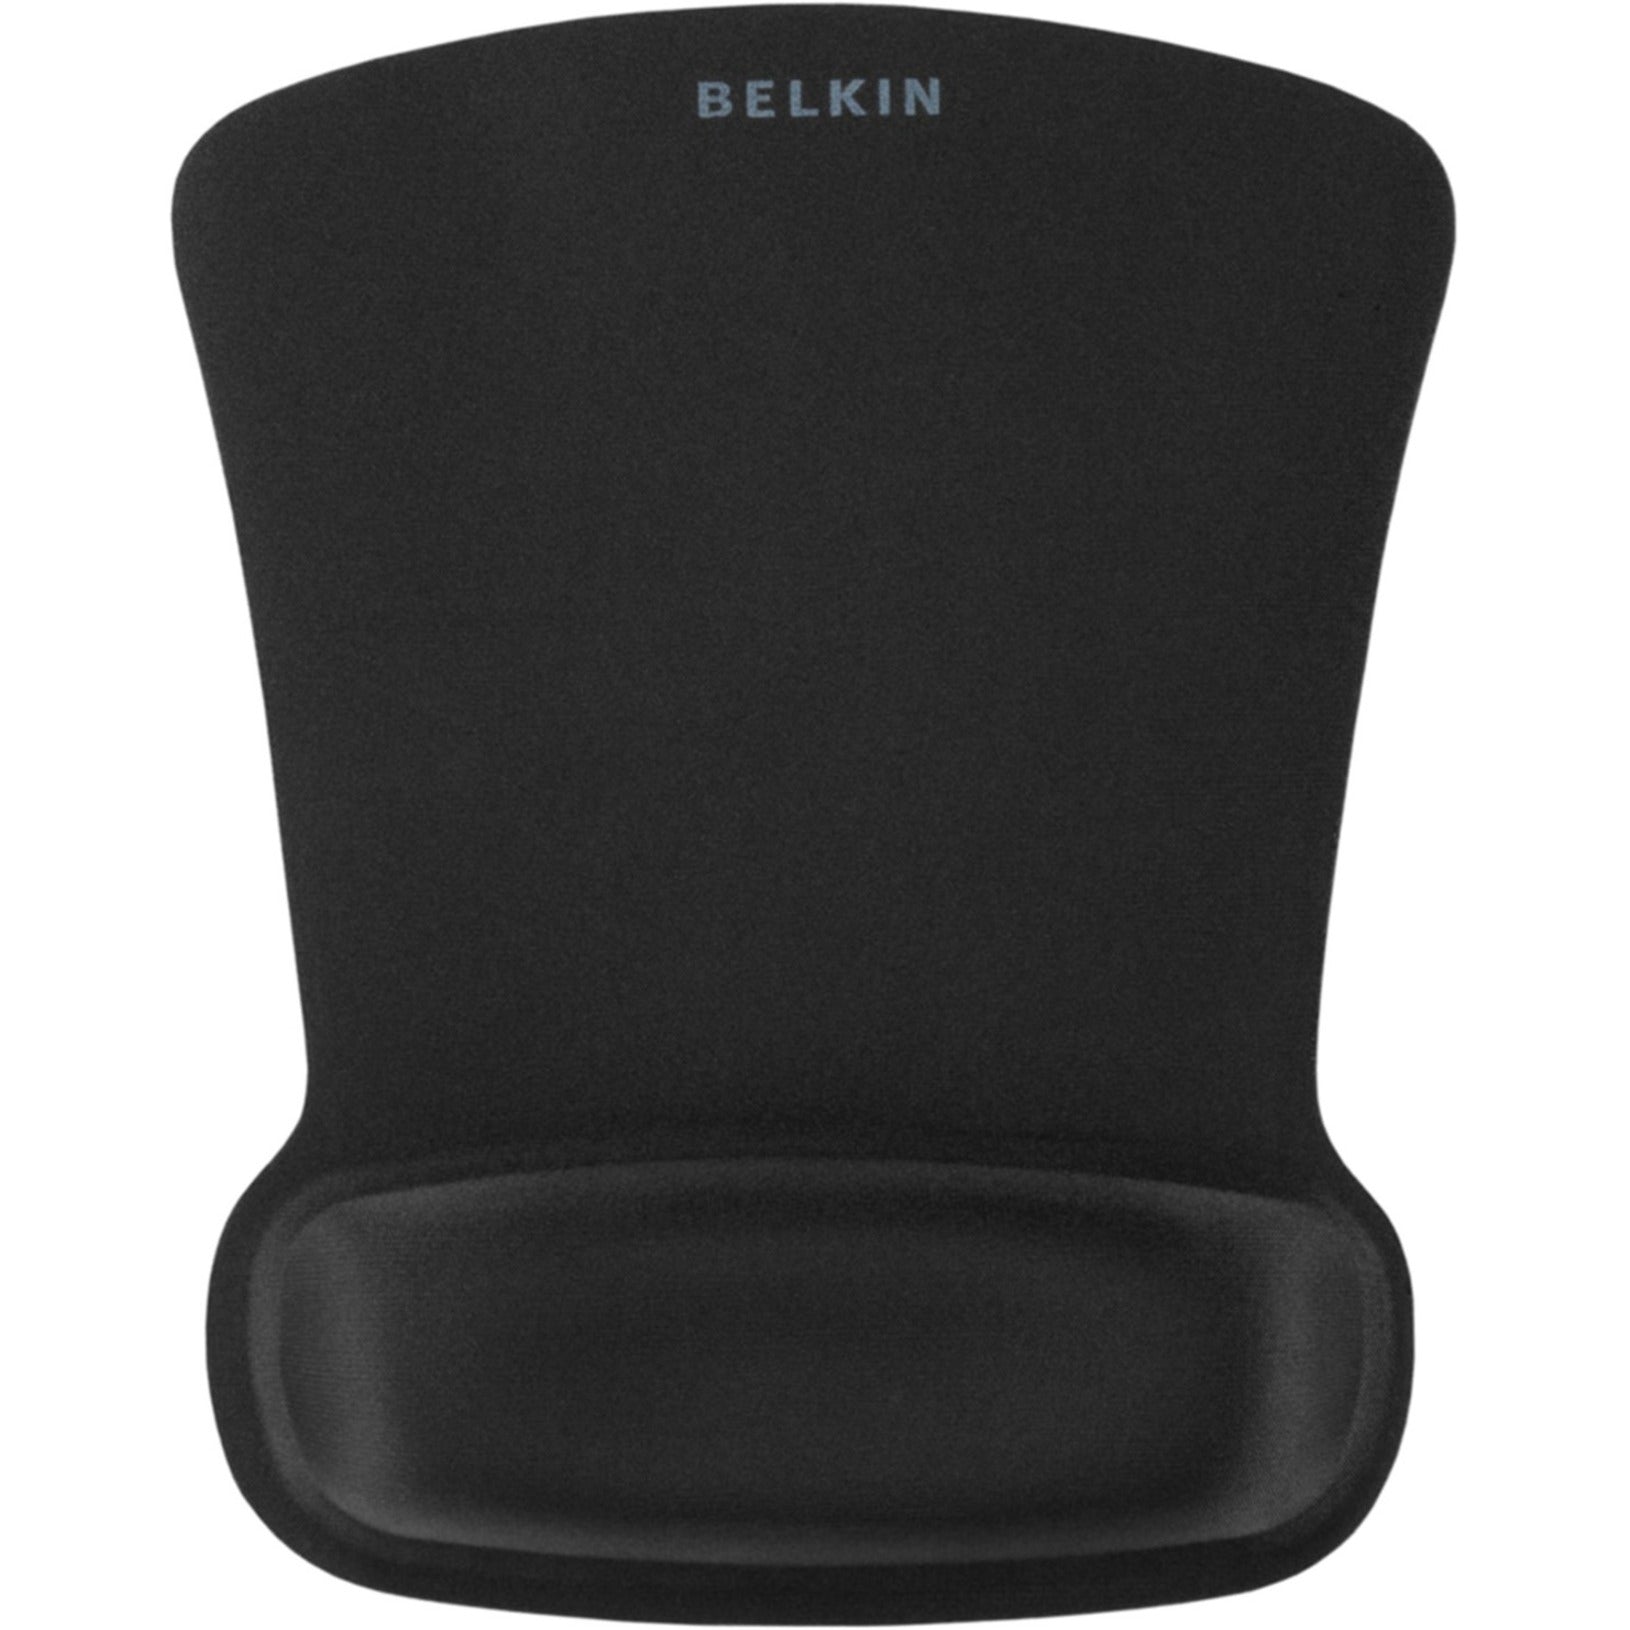 Belkin F8E262-BLK WaveRest Gel Mouse Pad (Black), Smooth and Precise Tracking